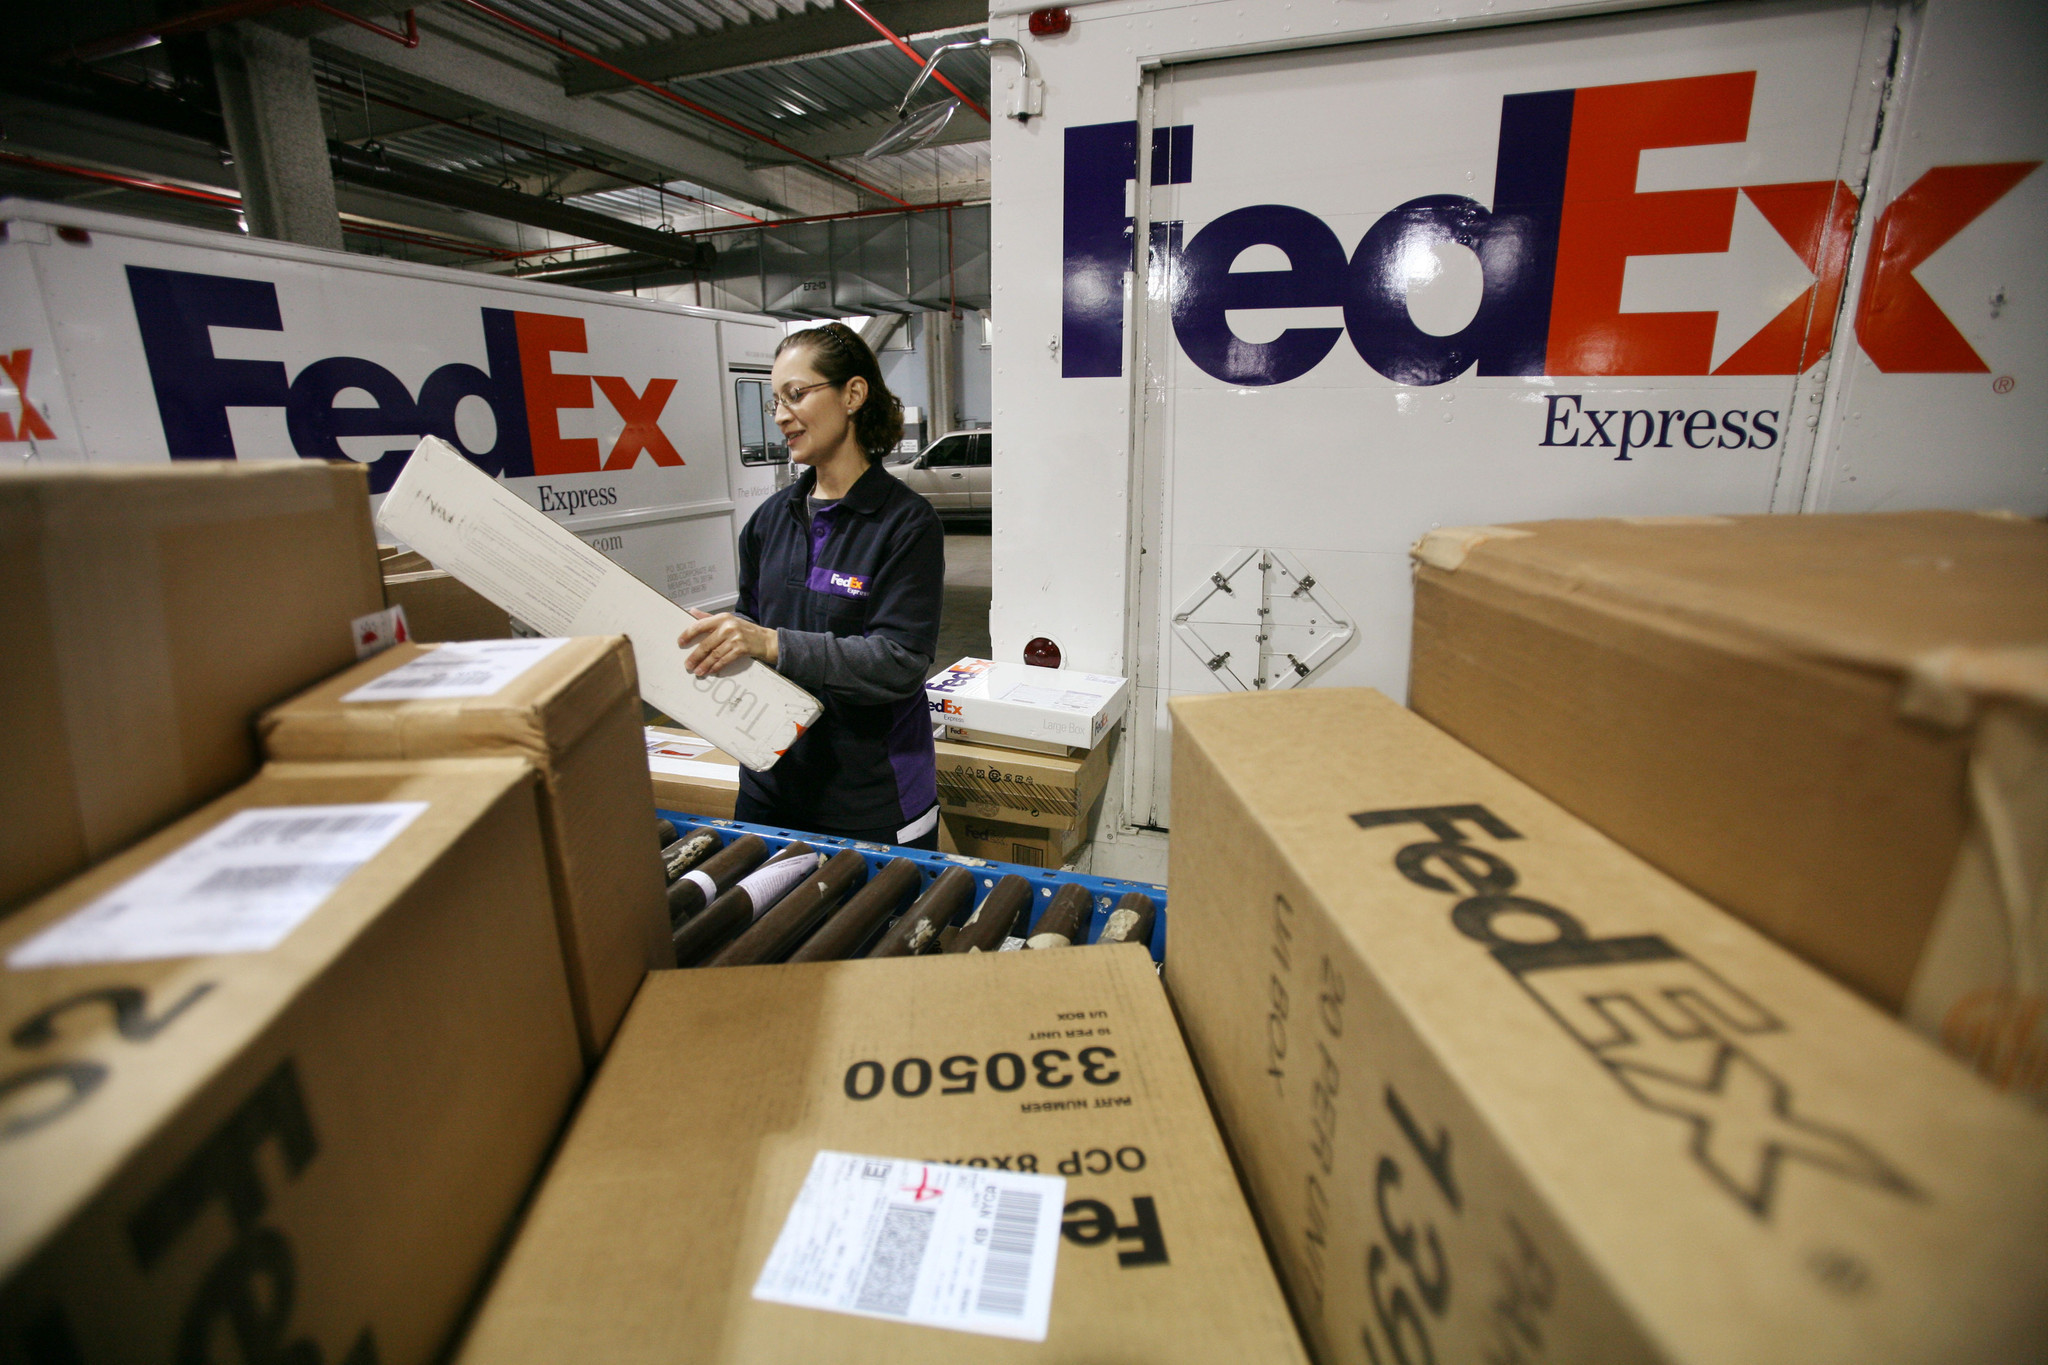 Your oversize orders are giving FedEx a big delivery headache - Chicago